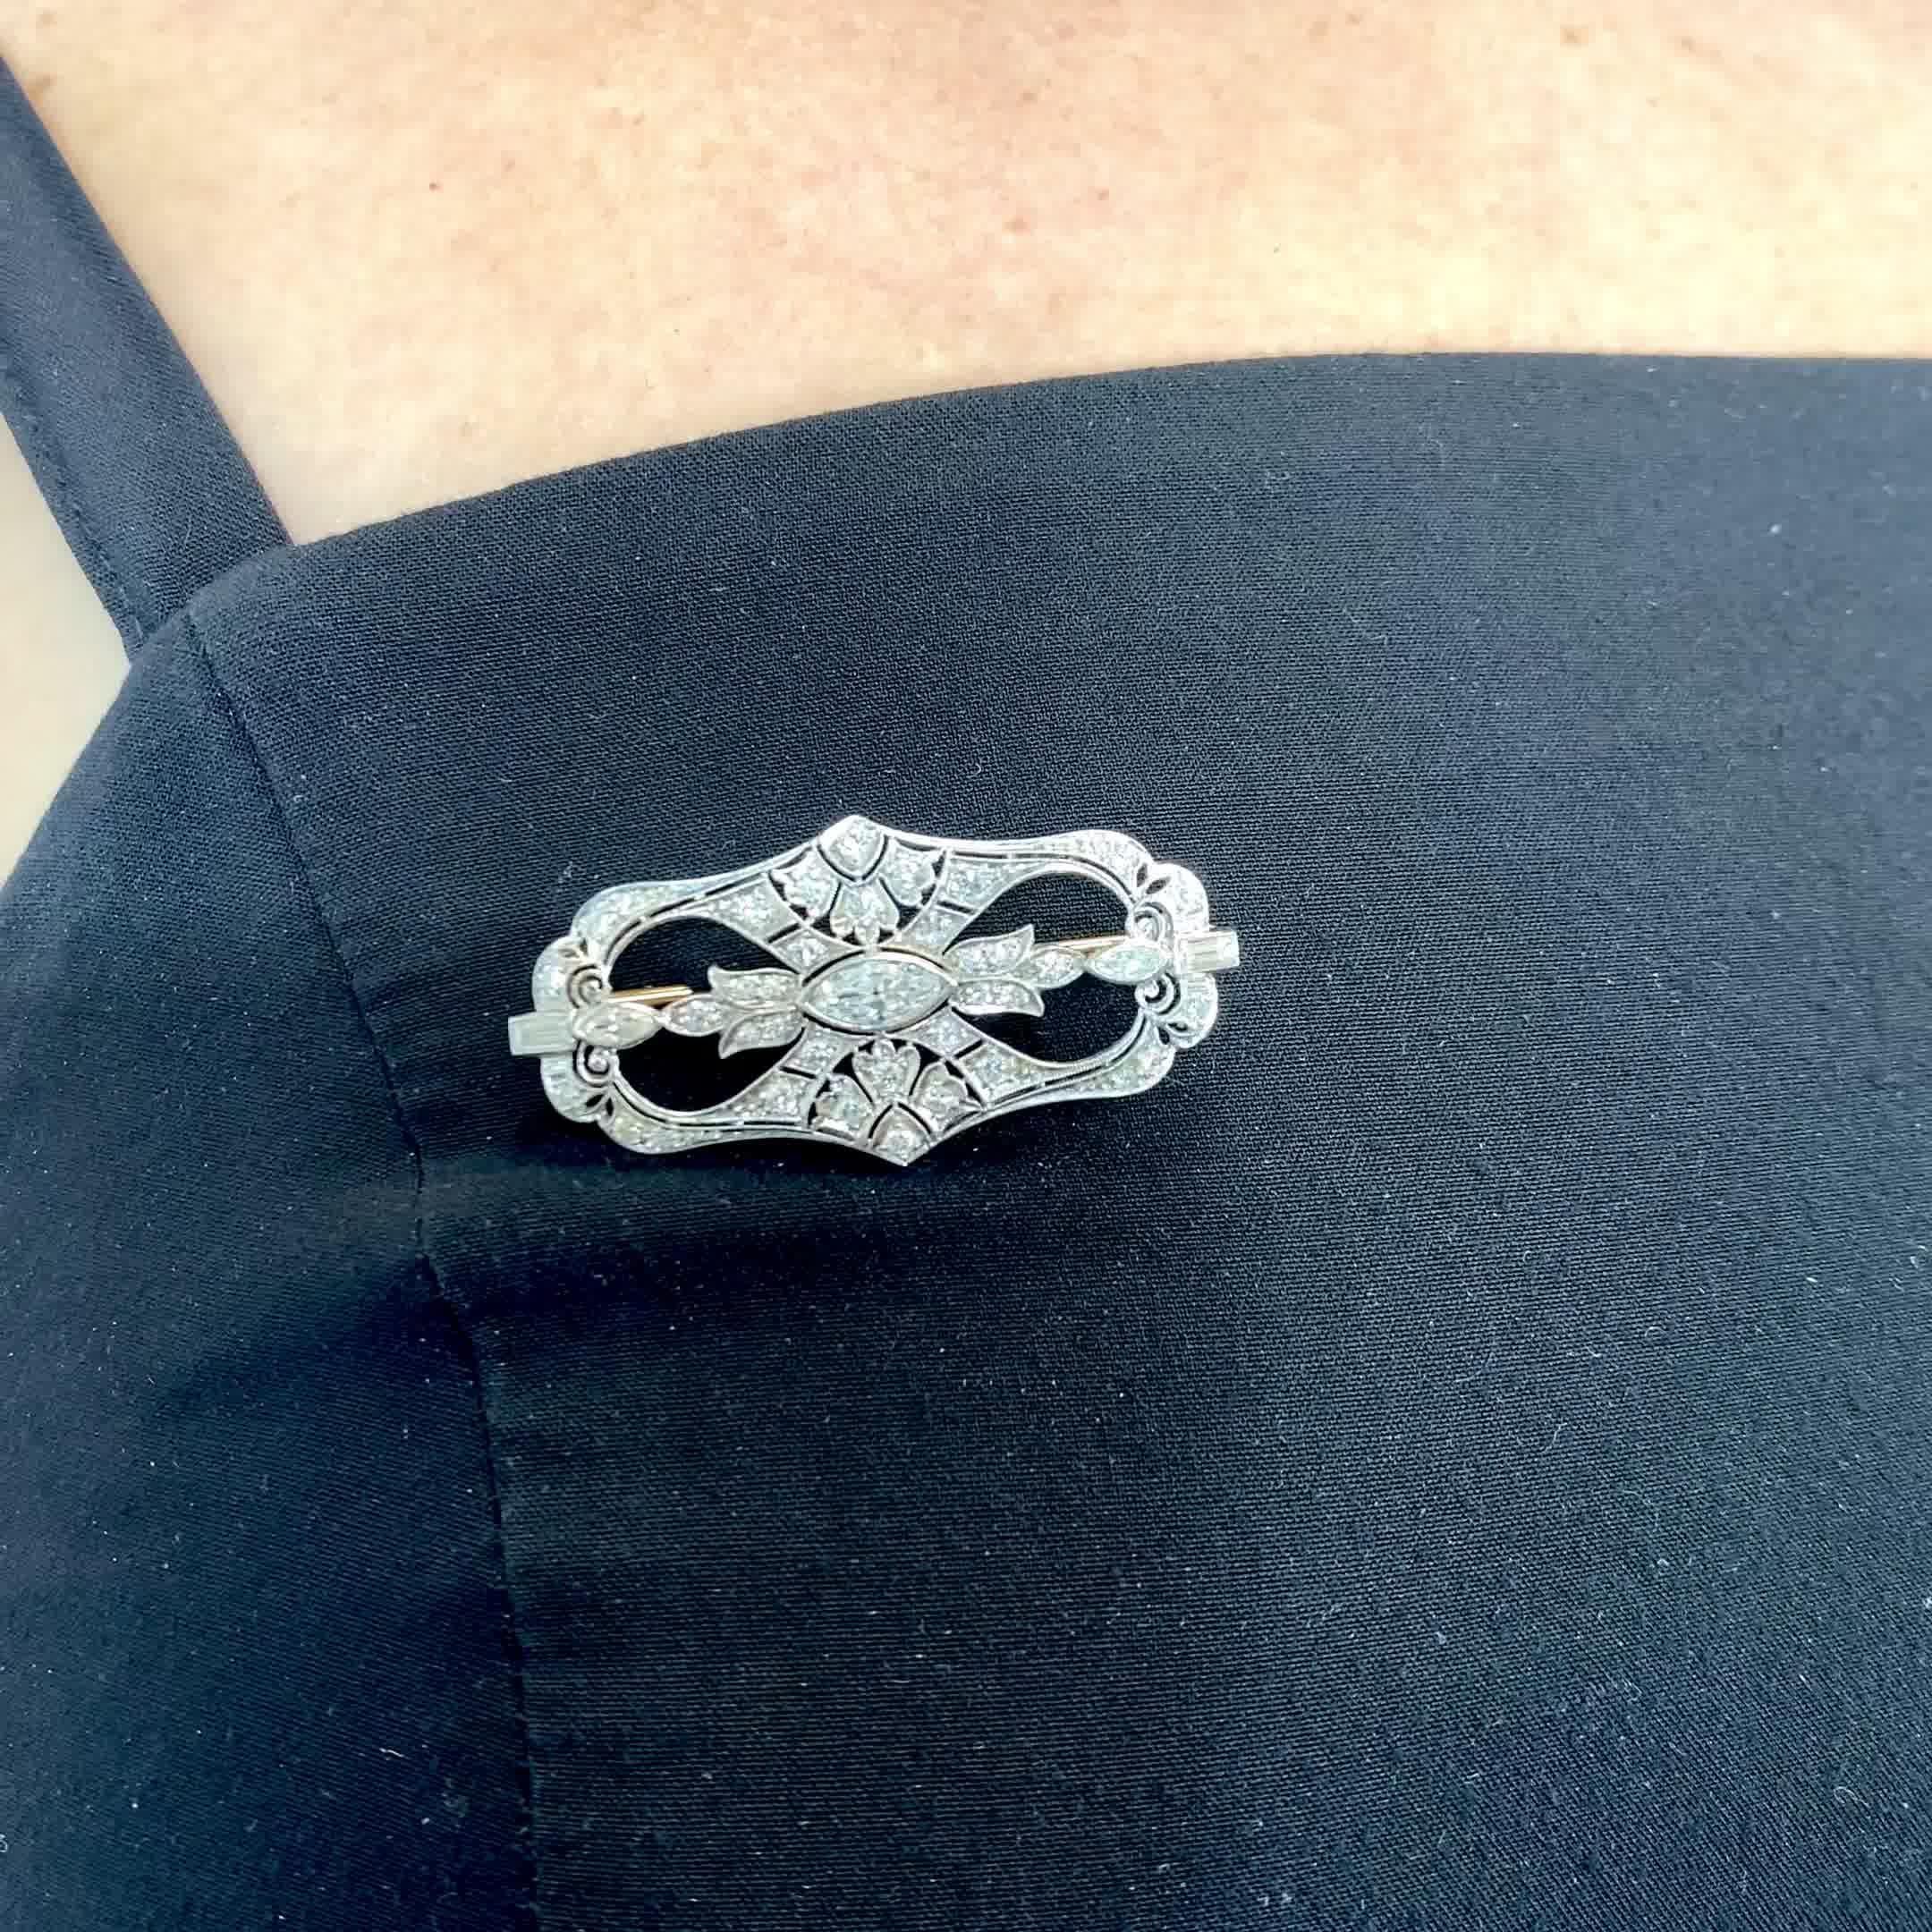 Antique Tiffany & Co. Diamond Platinum Brooch.The brooch features a marquise cut diamond approximately 0.35 carat, E color, VS+ clarity. Accented by 2 marquise, 2 baguettes,  38 OEC approximately 0.90 carat, H-I color average. Signed Tiffany & Co.